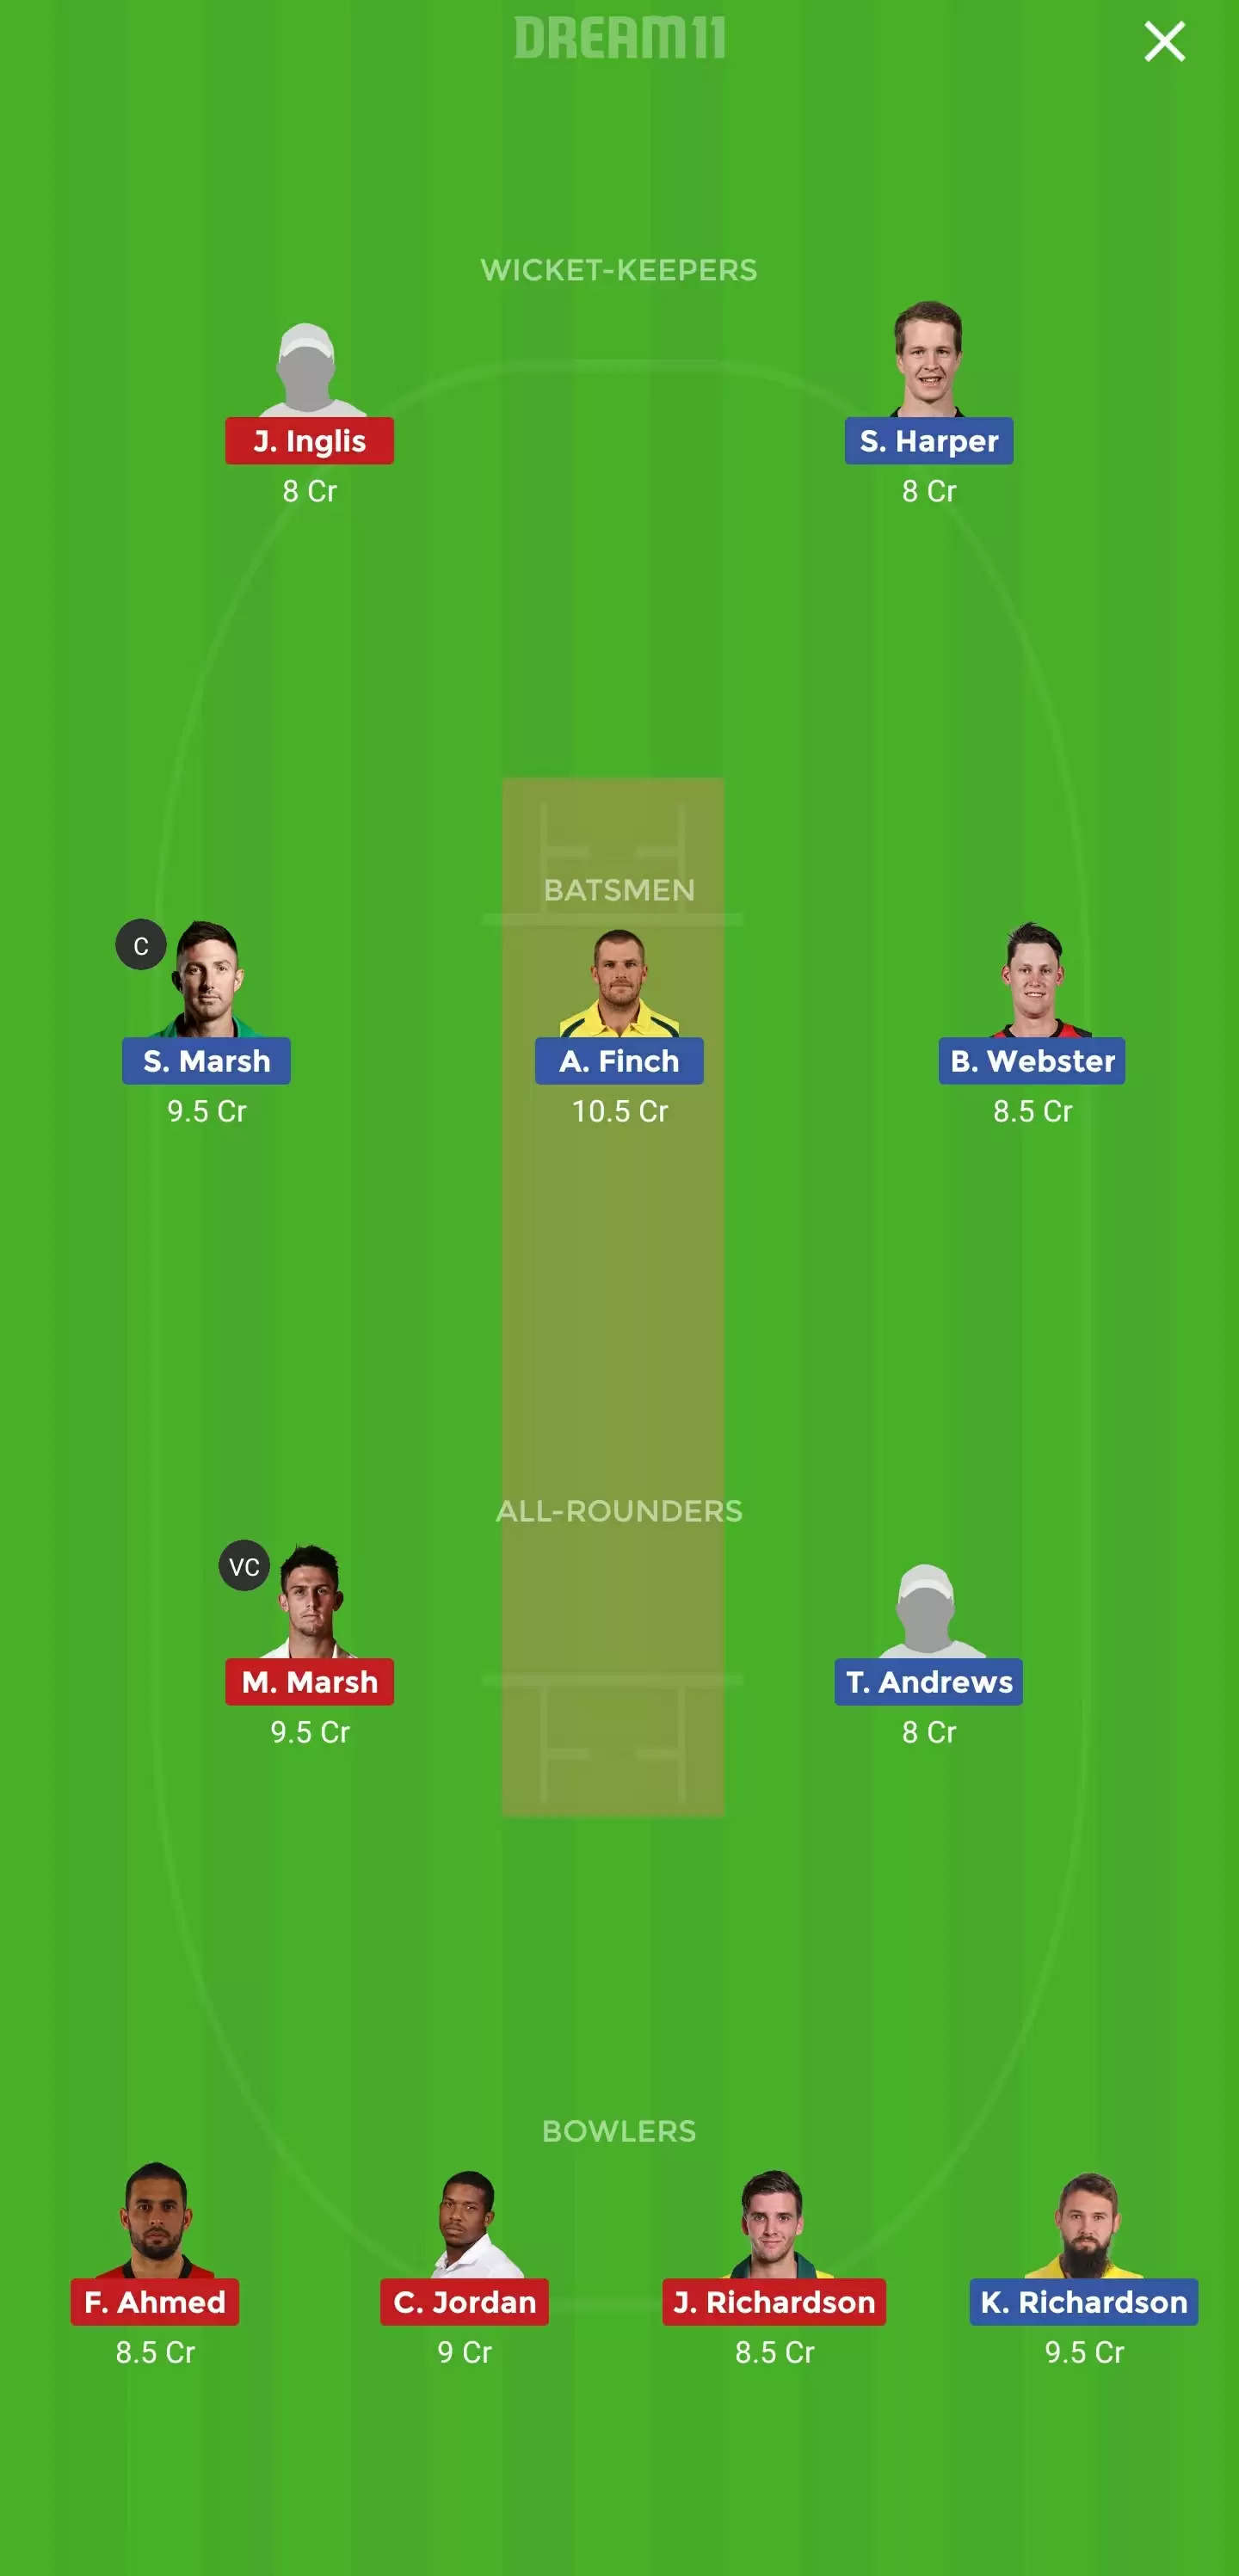 REN vs SCO Dream11 Fantasy Cricket Prediction – Match 26 of BBL 2019/20: Melbourne Renegades vs Perth Scorchers Probable Playing XI, Pitch and Weather Update